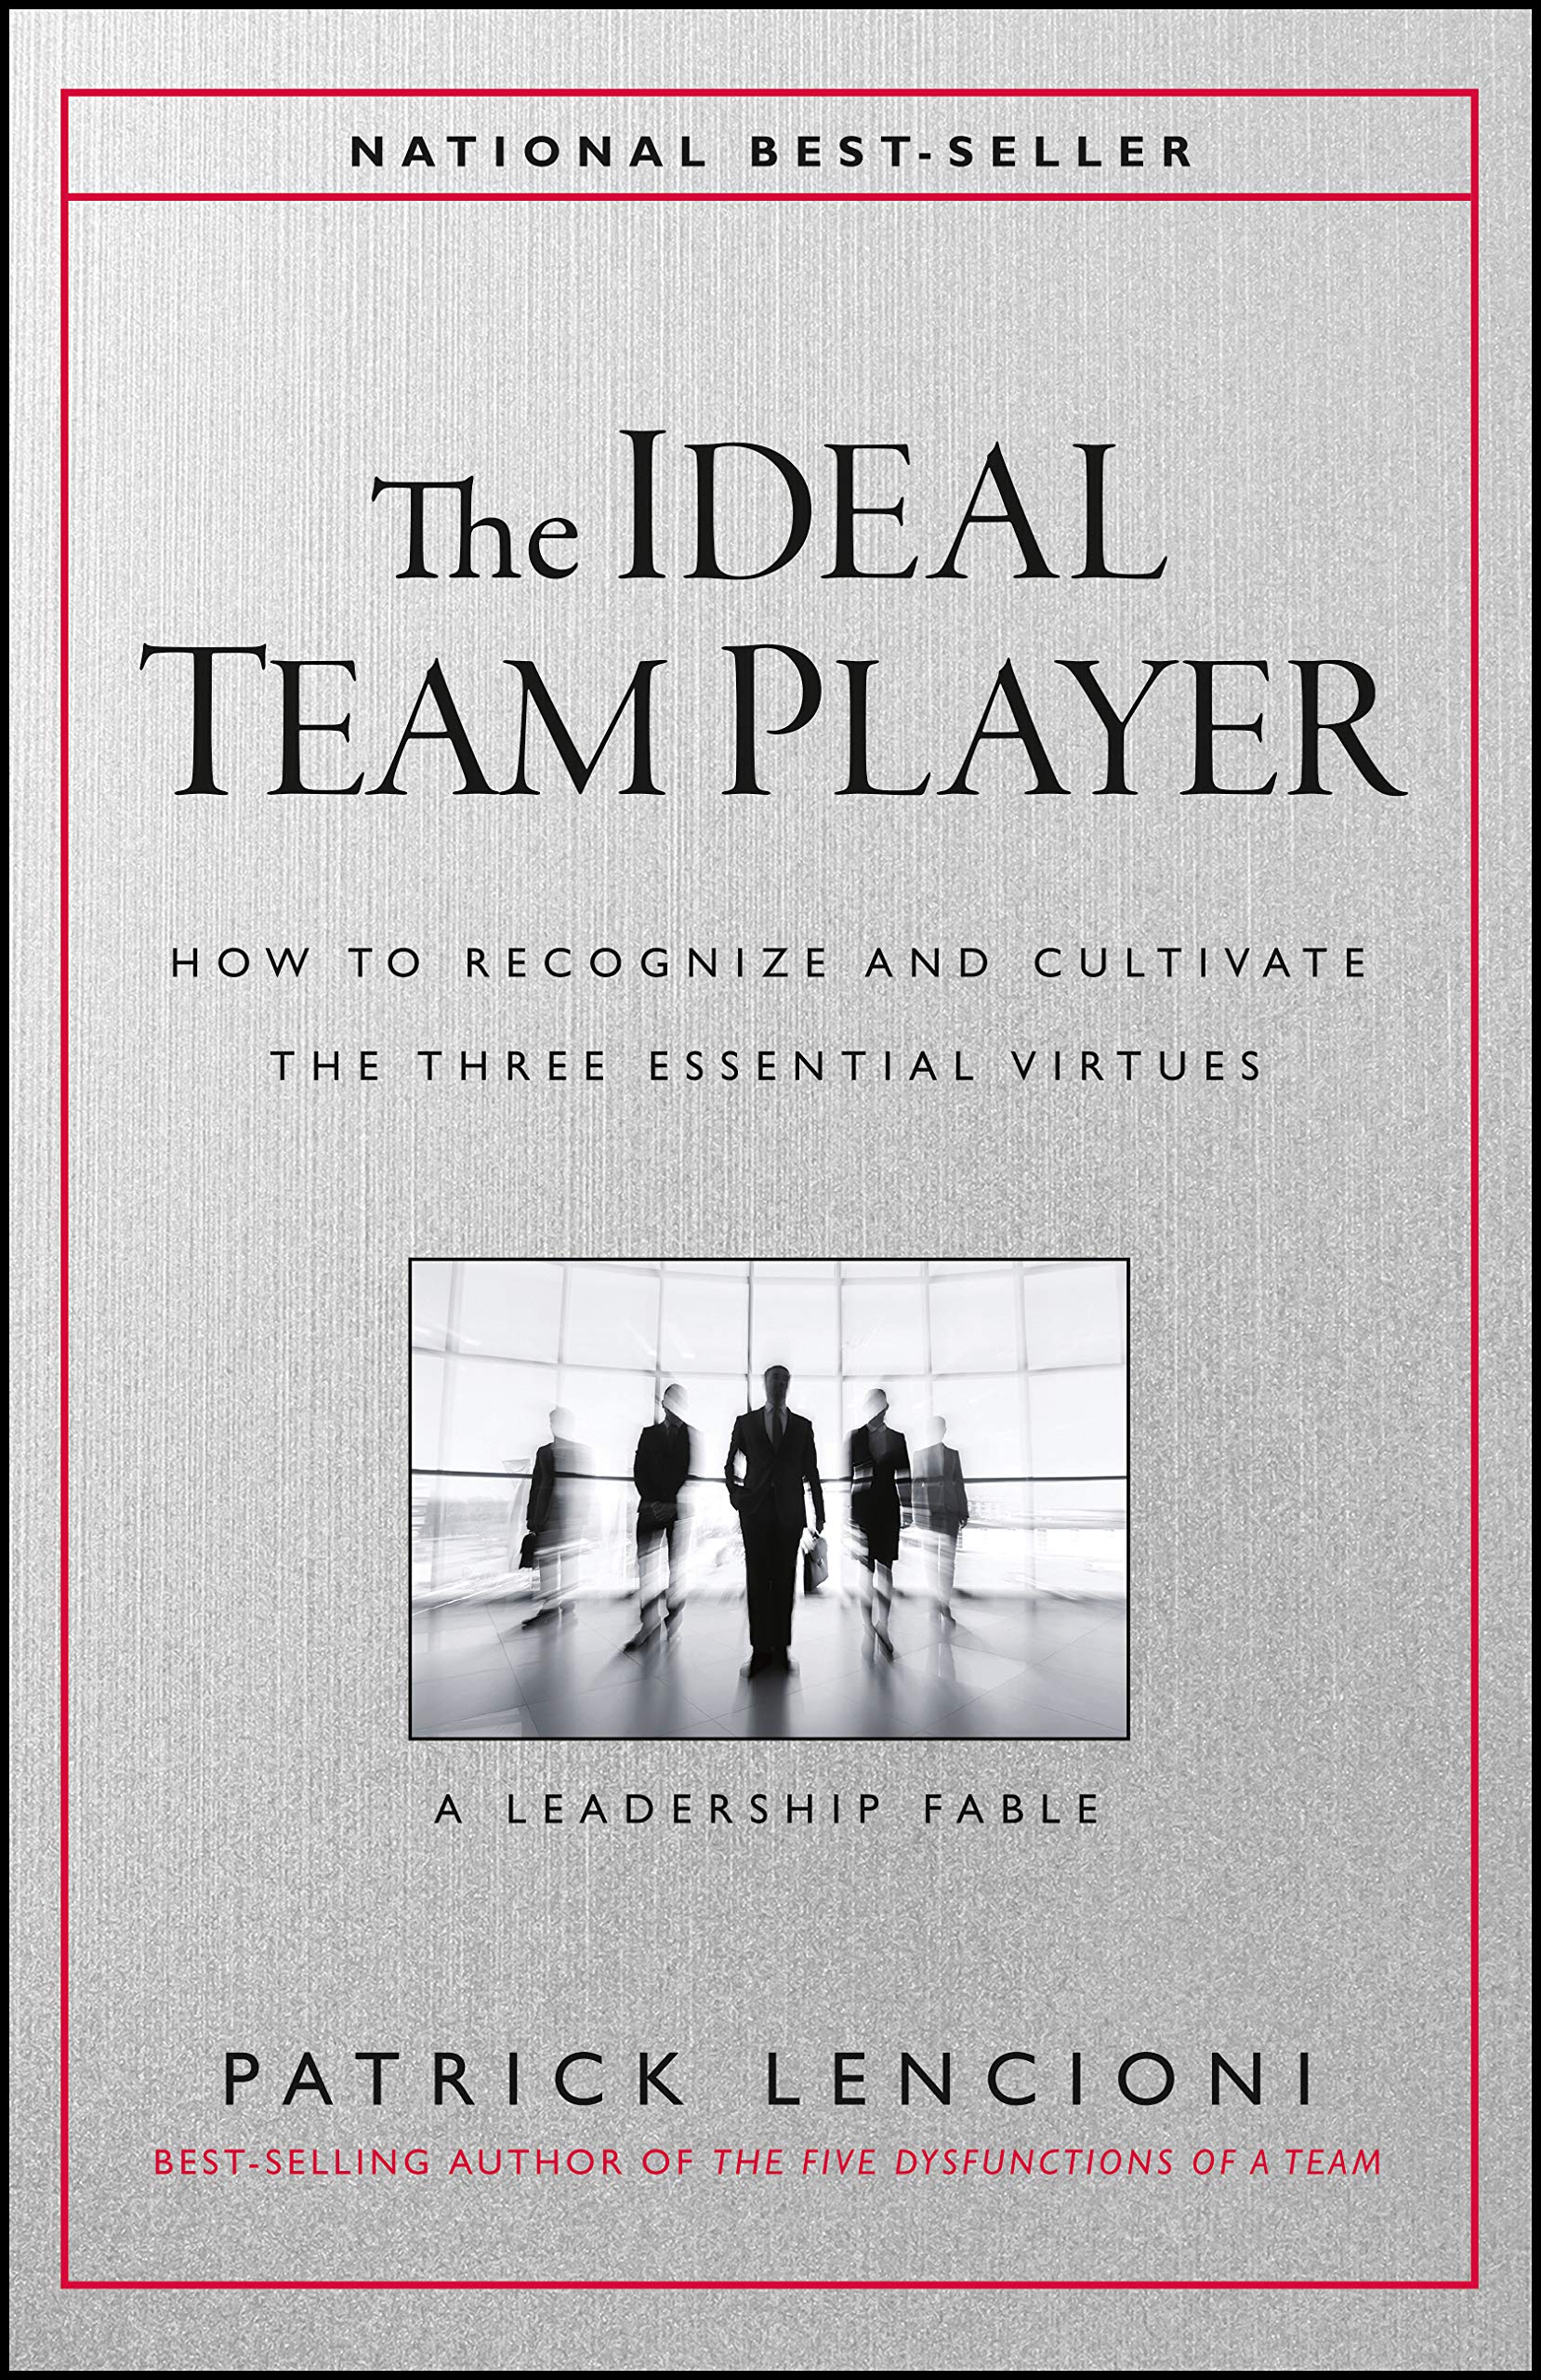 The Ideal Team Player: How to Recognize and Cultivate The Three Essential Virtues - Lencioni (2016)